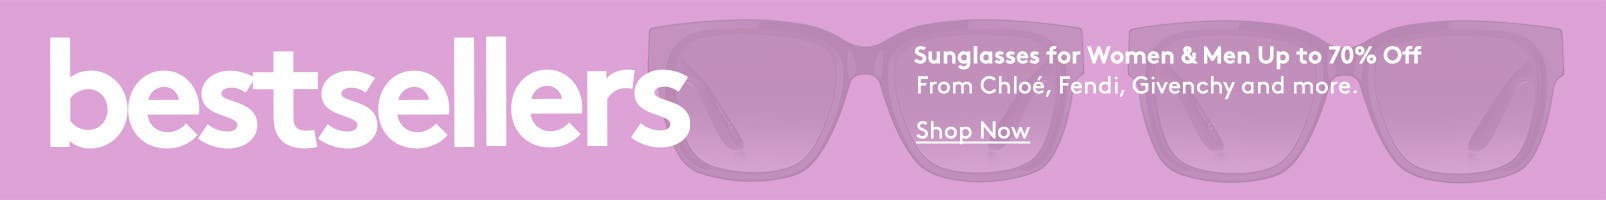 Sunglasses bestsellers for women and men up to 70% off. From Chloé, Fendi, Givenchy and more.